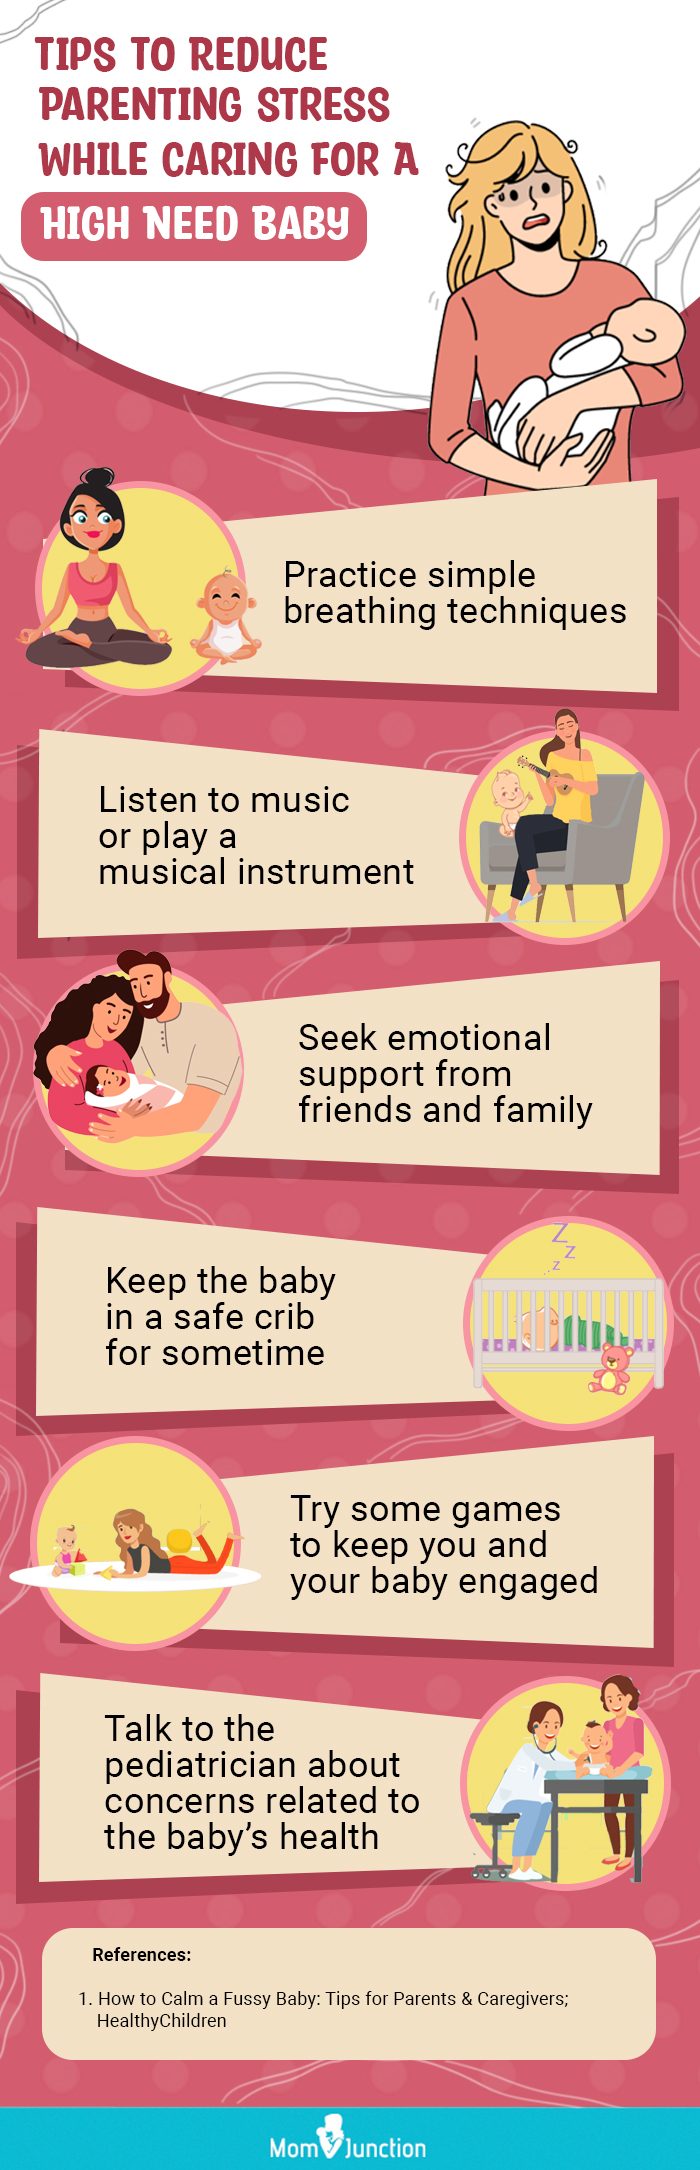 tips to reduce parenting stress while caring for a high need baby [infographic]